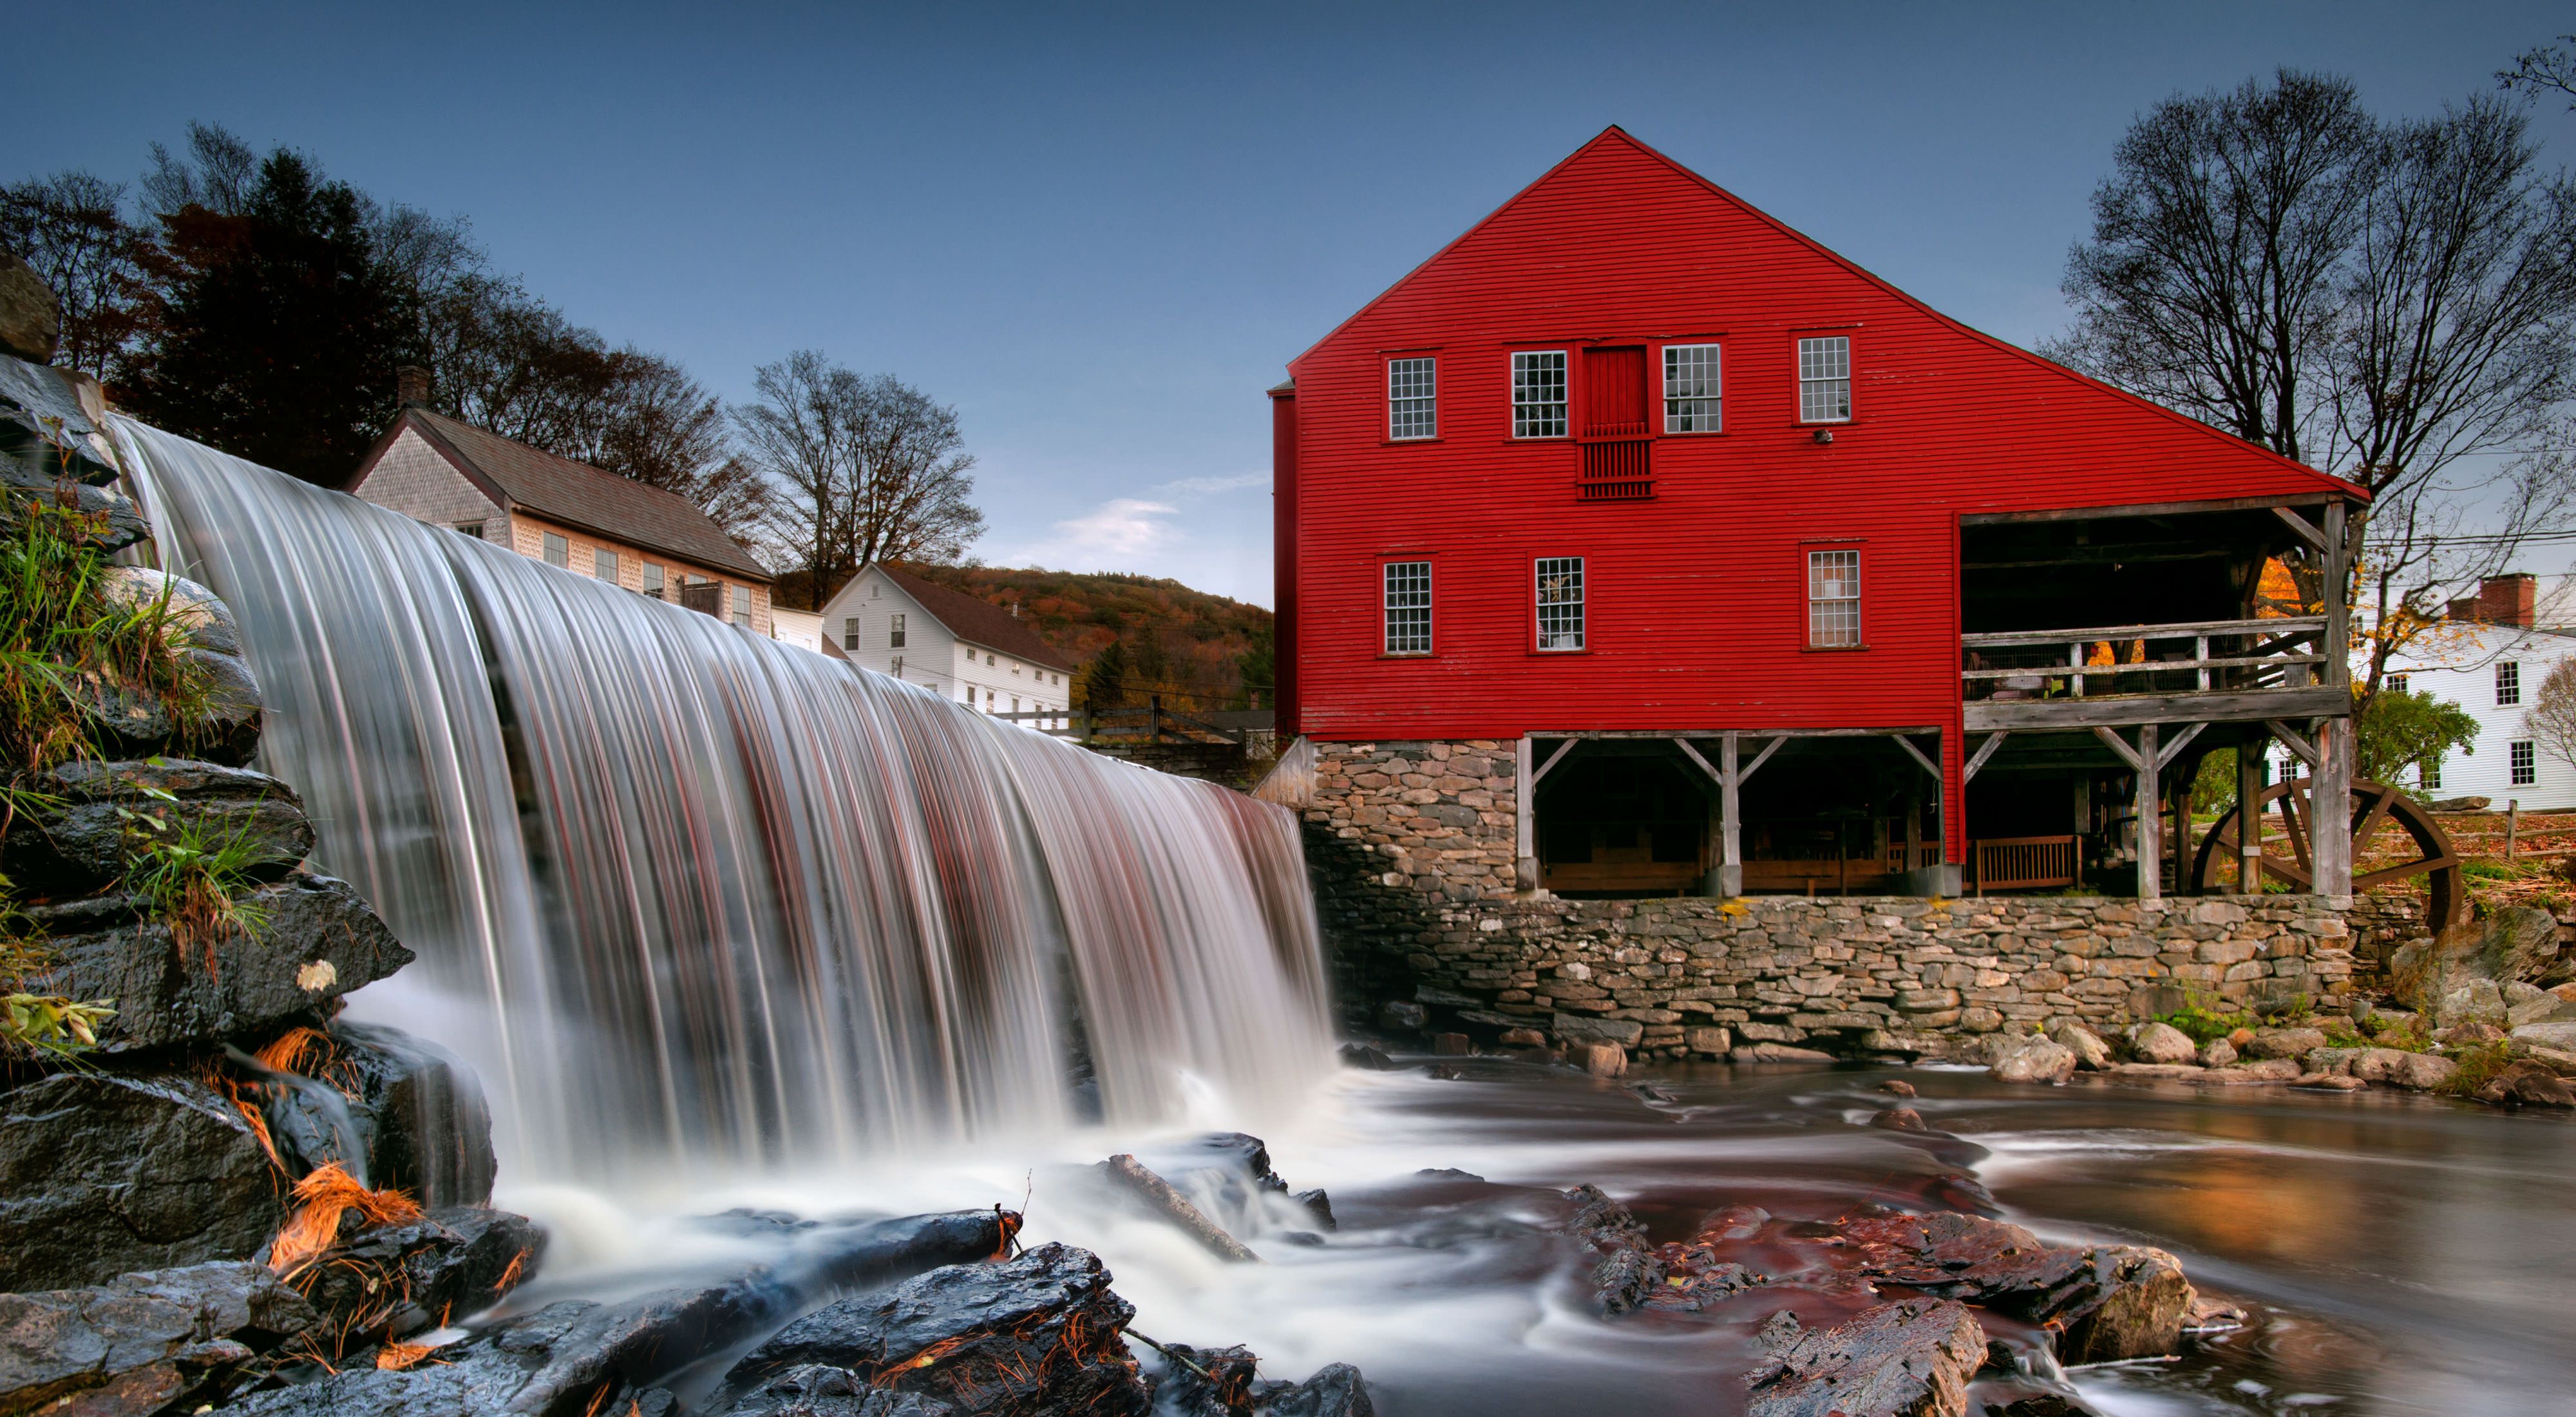 A small waterfall near an old red mill.